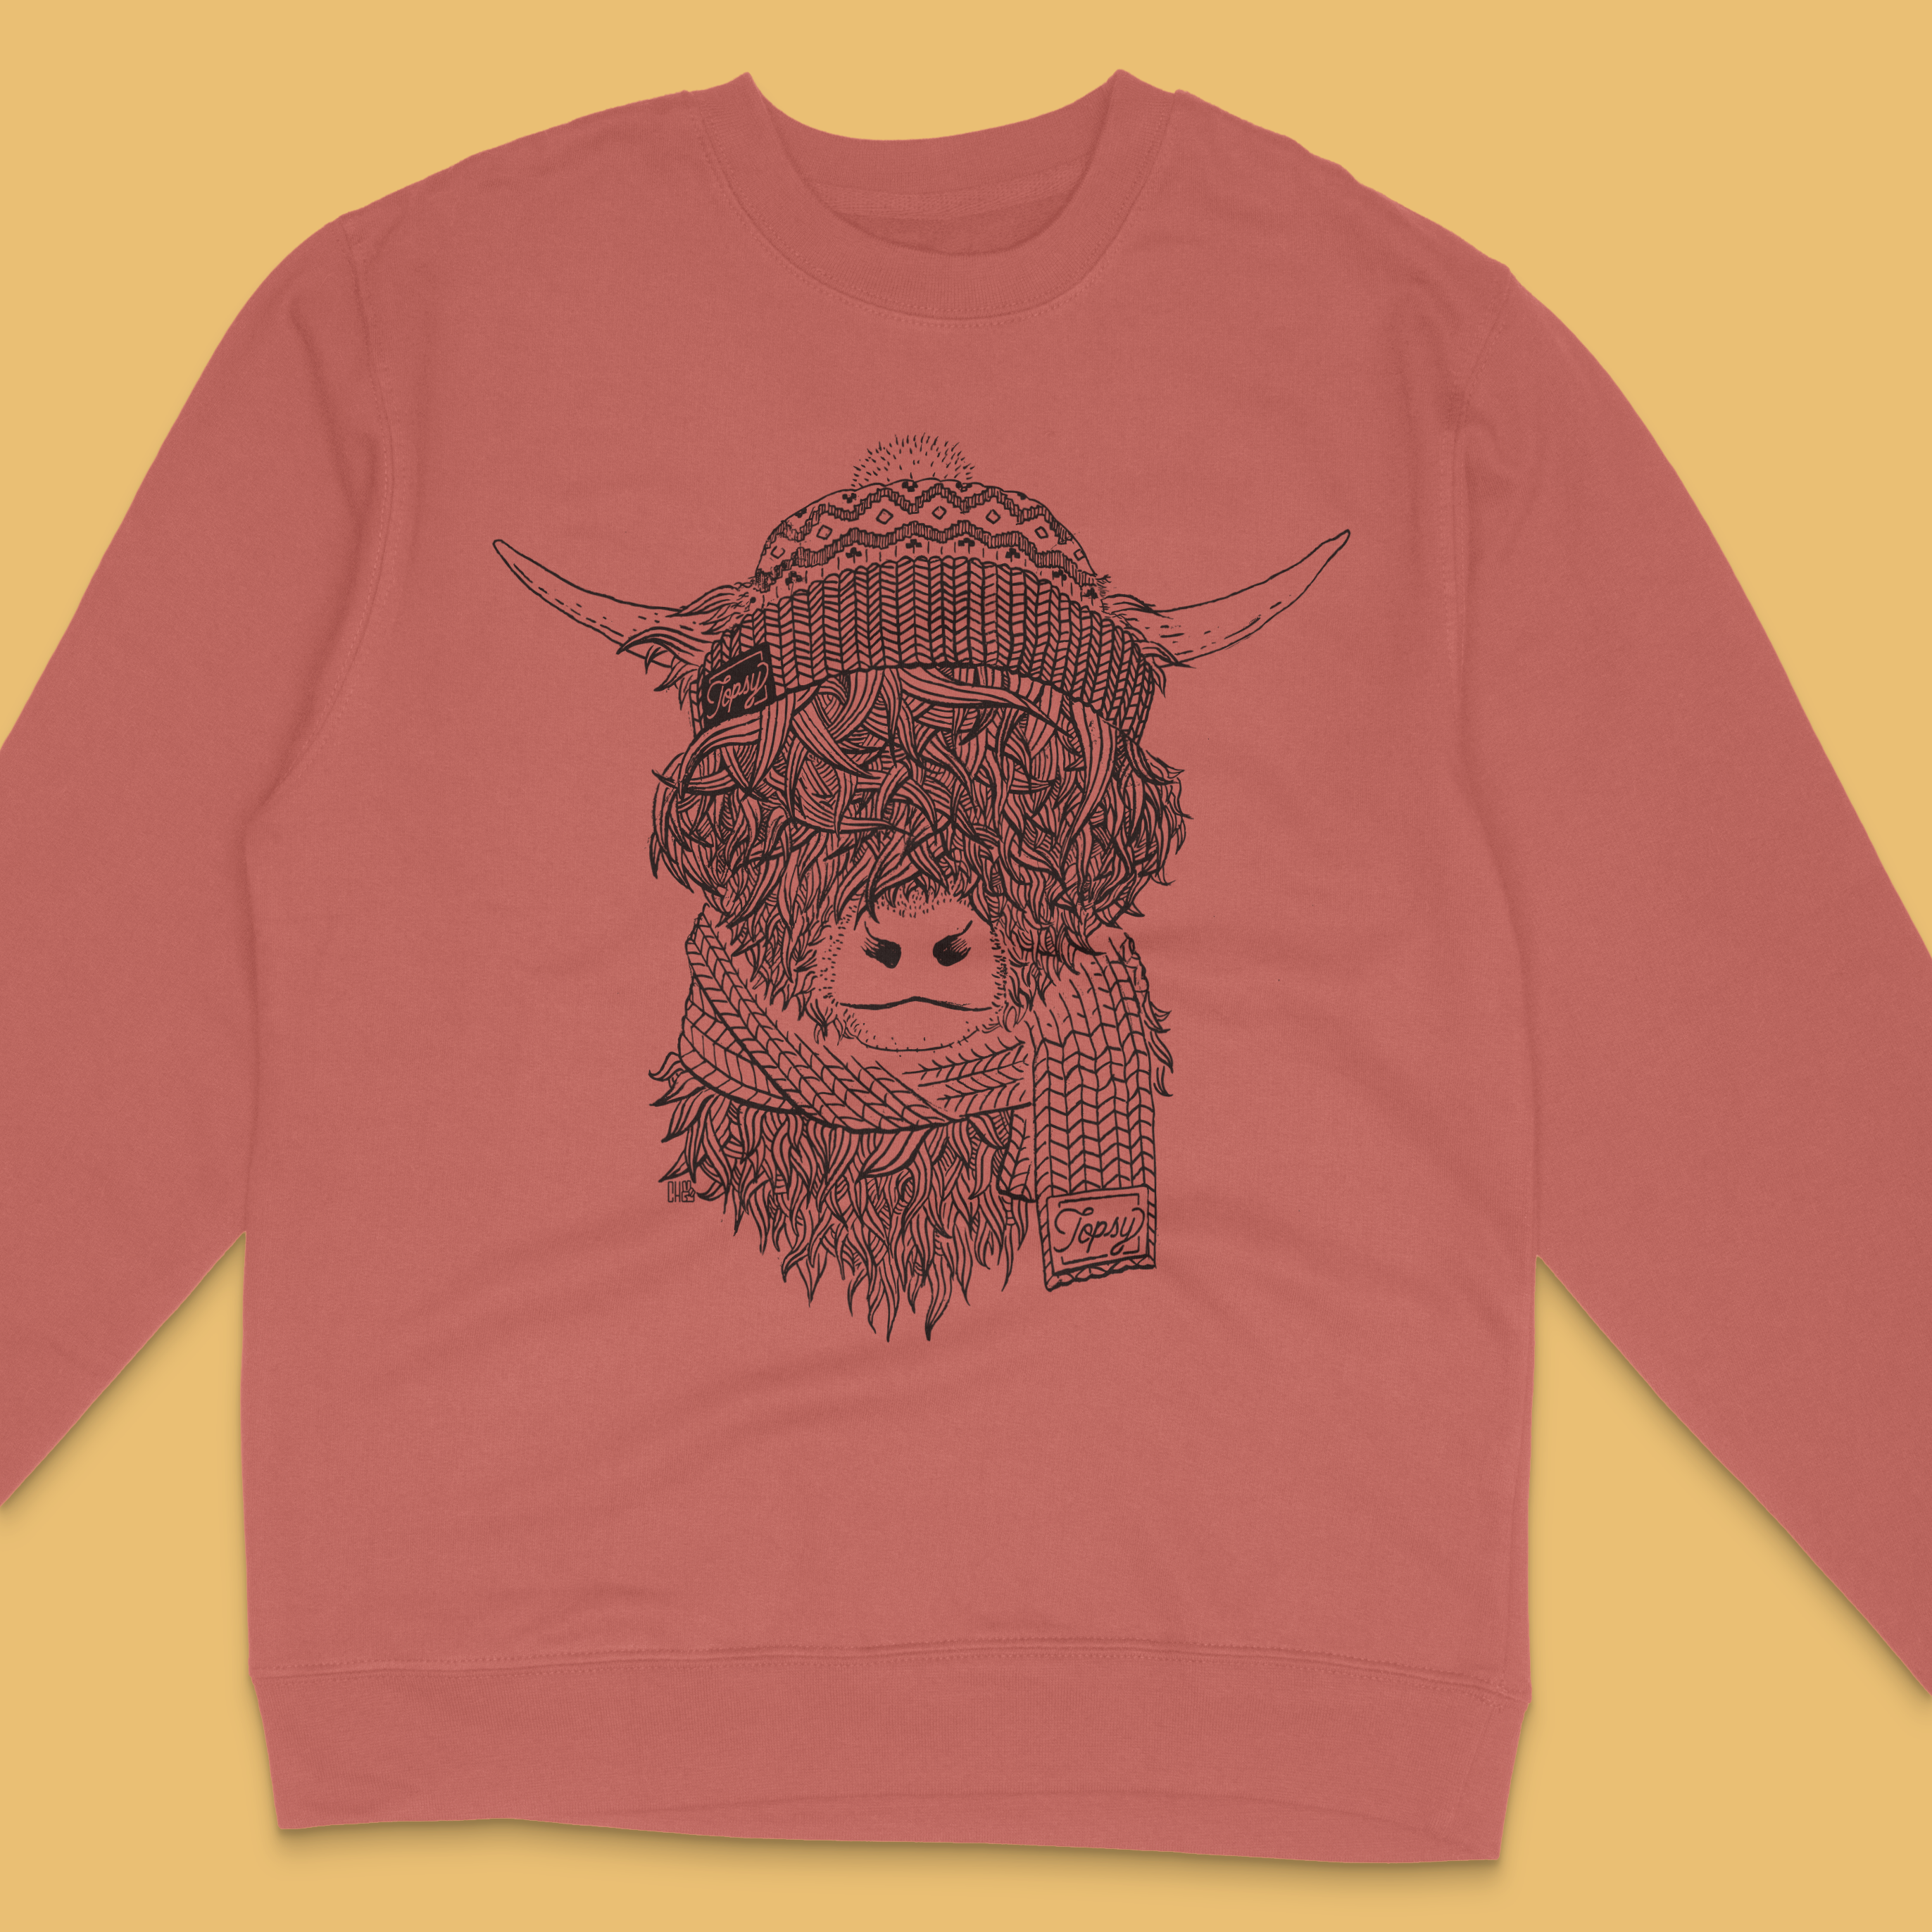 Topsy Farms' highland cow sweatshirt in clay red